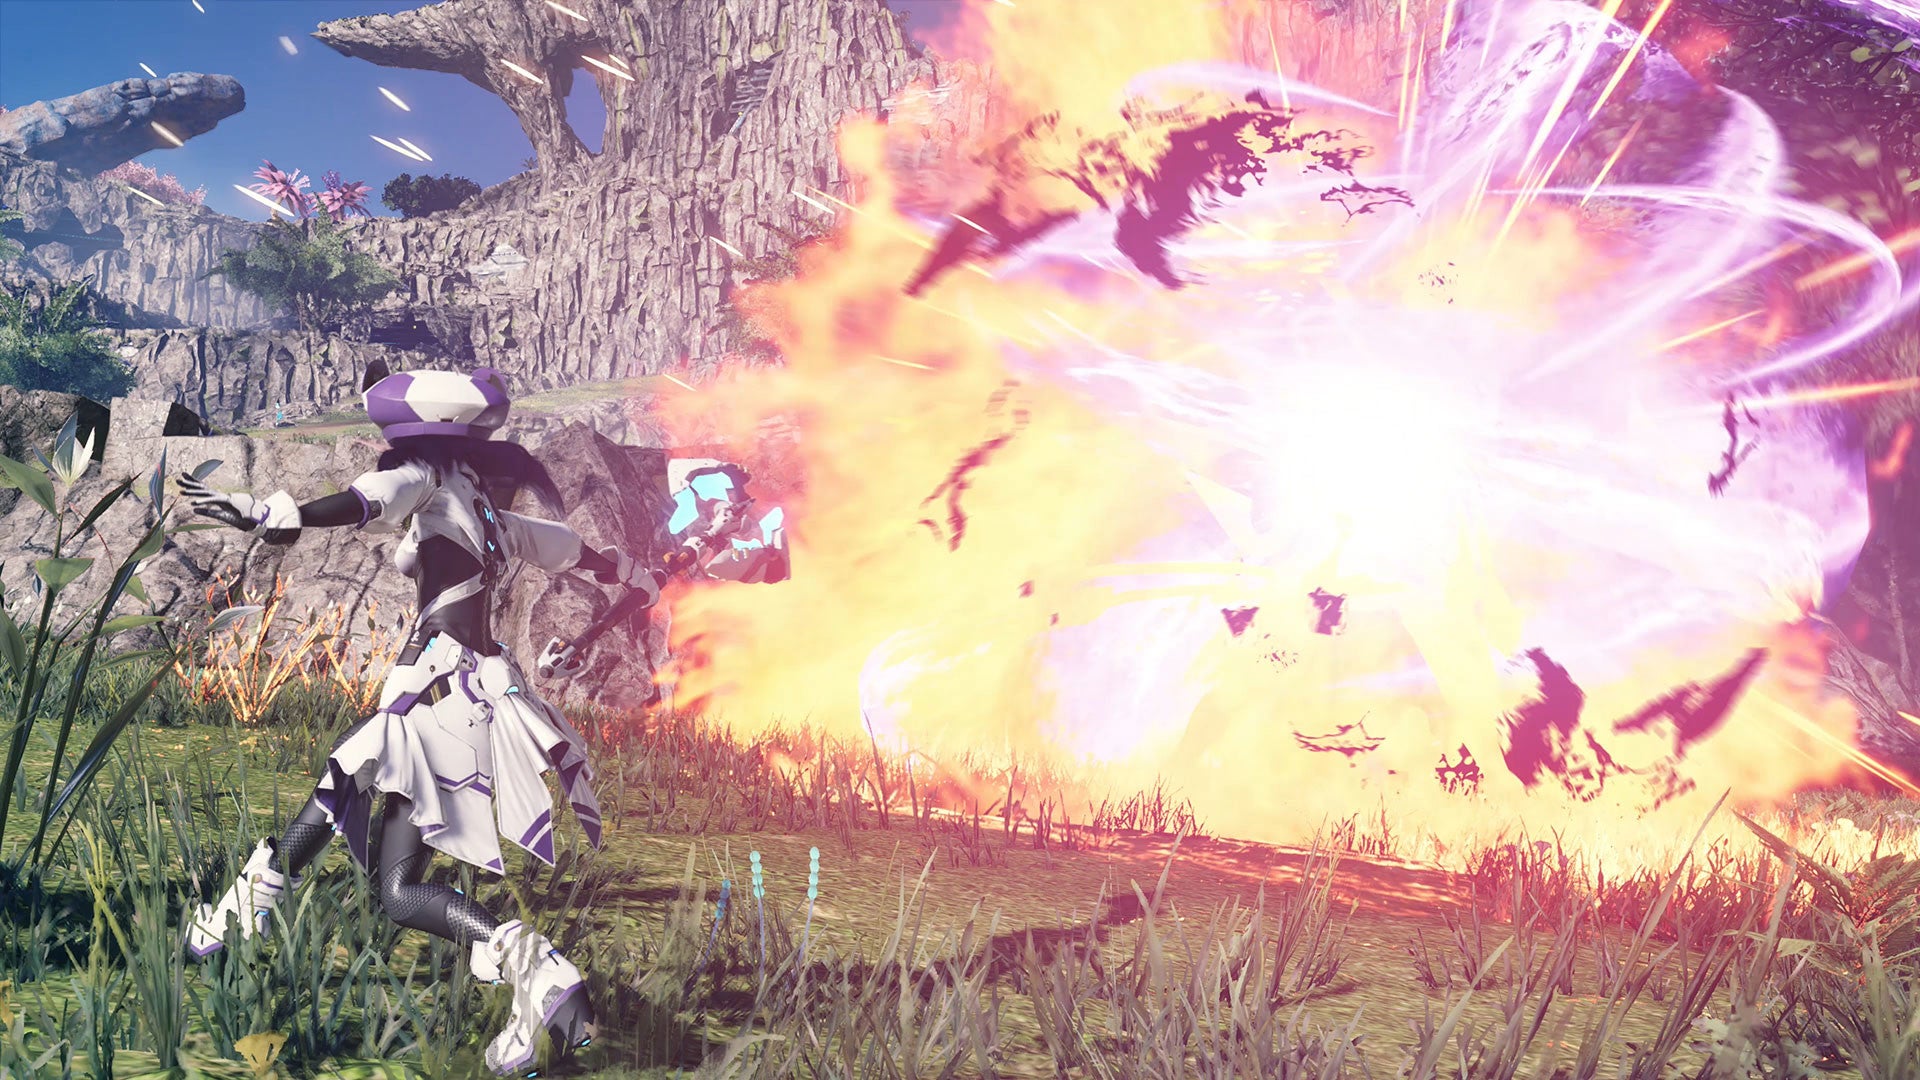 A player walks away from an explosion in Phantasy Star Online 2: New Genesis